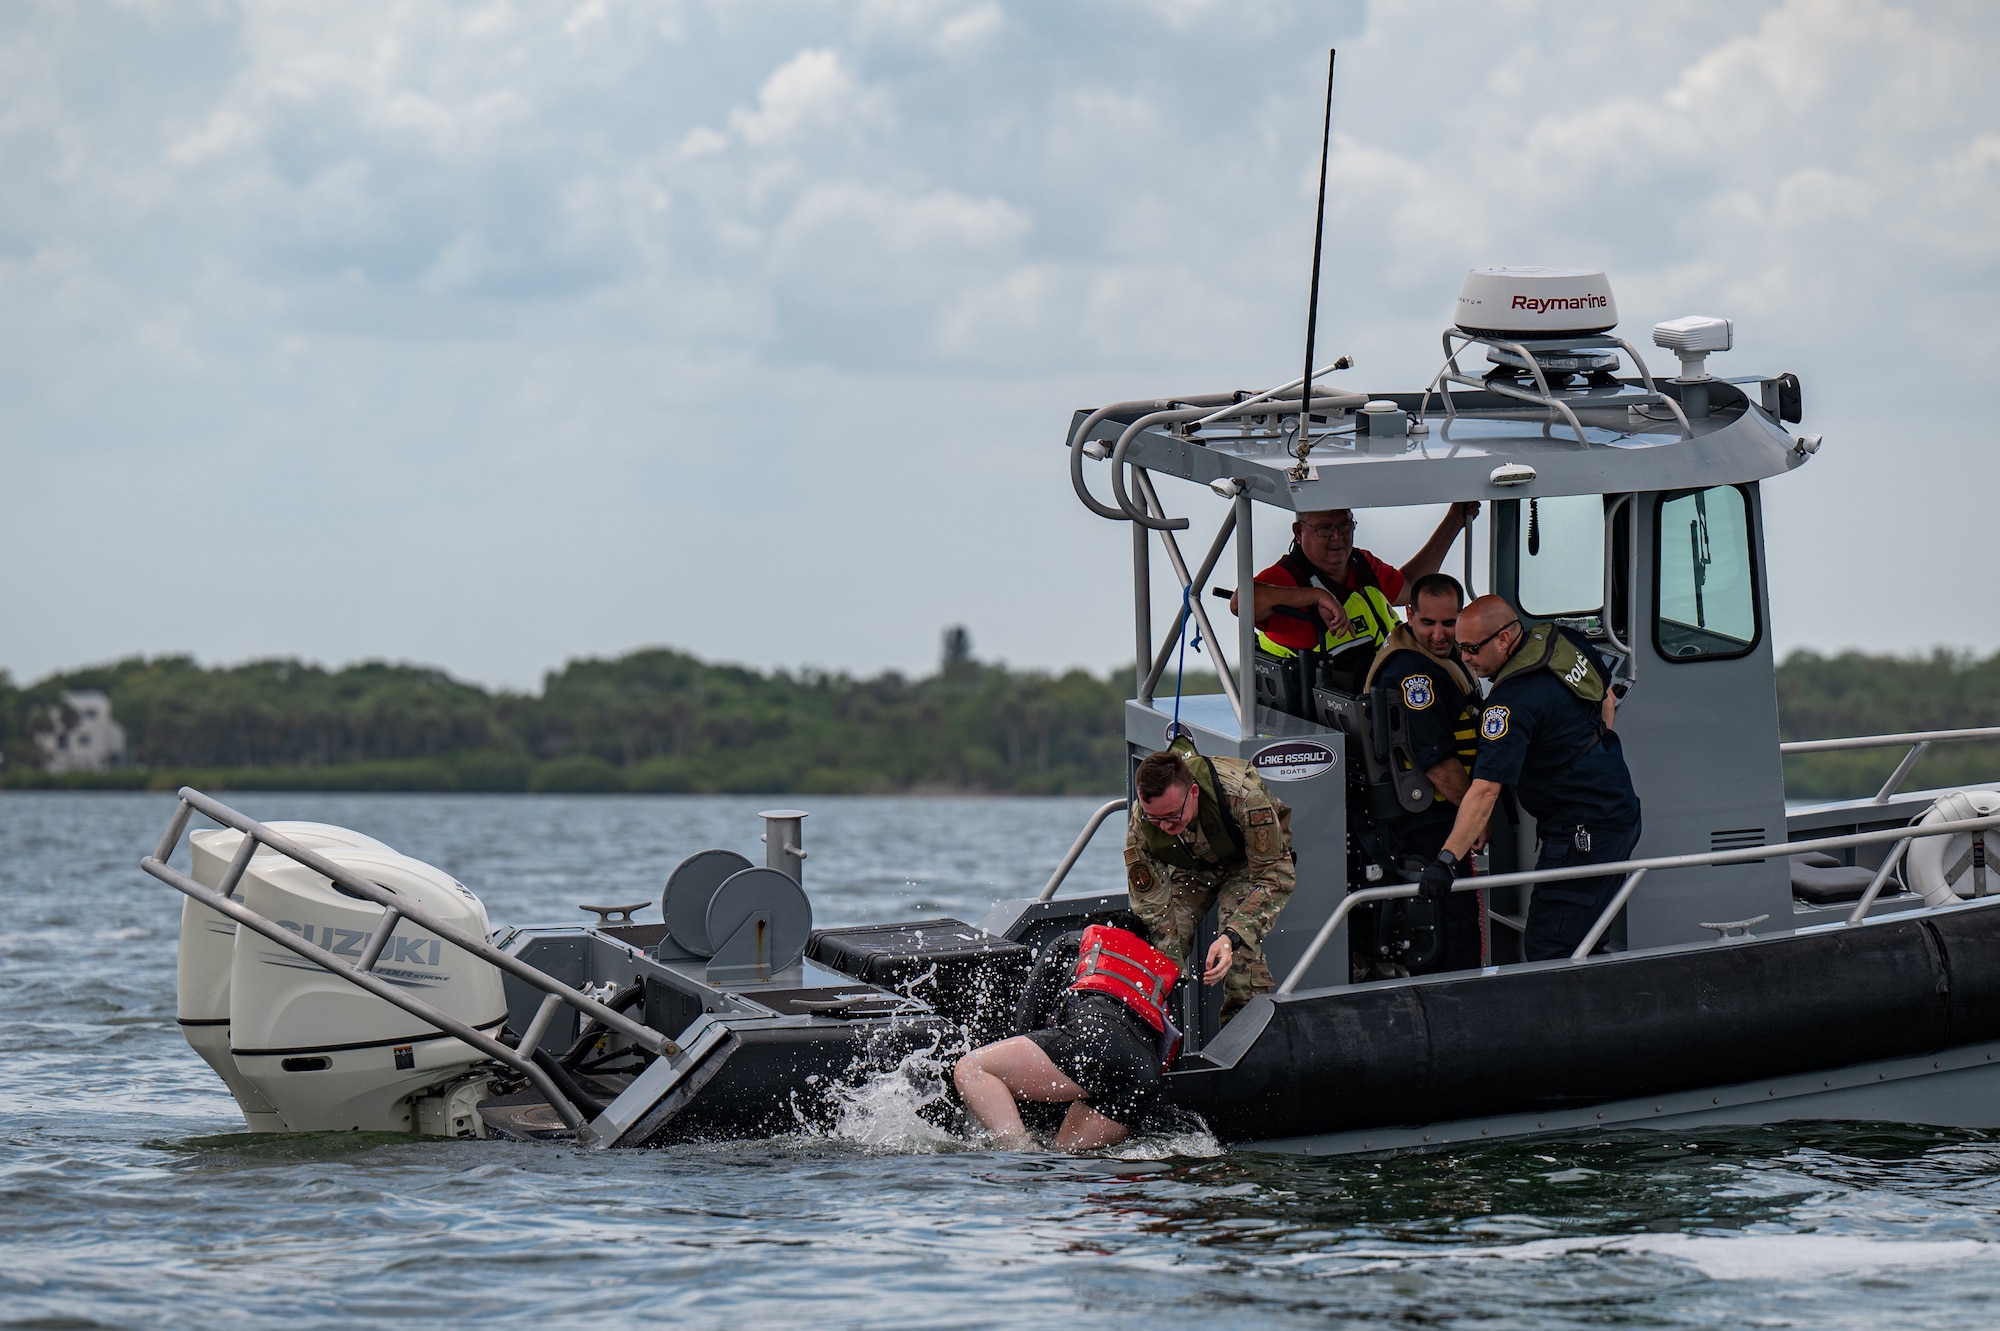 45th Security Forces Squadron marine patrolmen train on maritime operations at Patrick Space Force Base, Fla., April 14, 2022. Twelve defenders graduated the National Association of State Boating Law Administrators boat crew member course certifying them as marine patrolmen. (U.S. Space Force photo by Senior Airman Thomas Sjoberg)